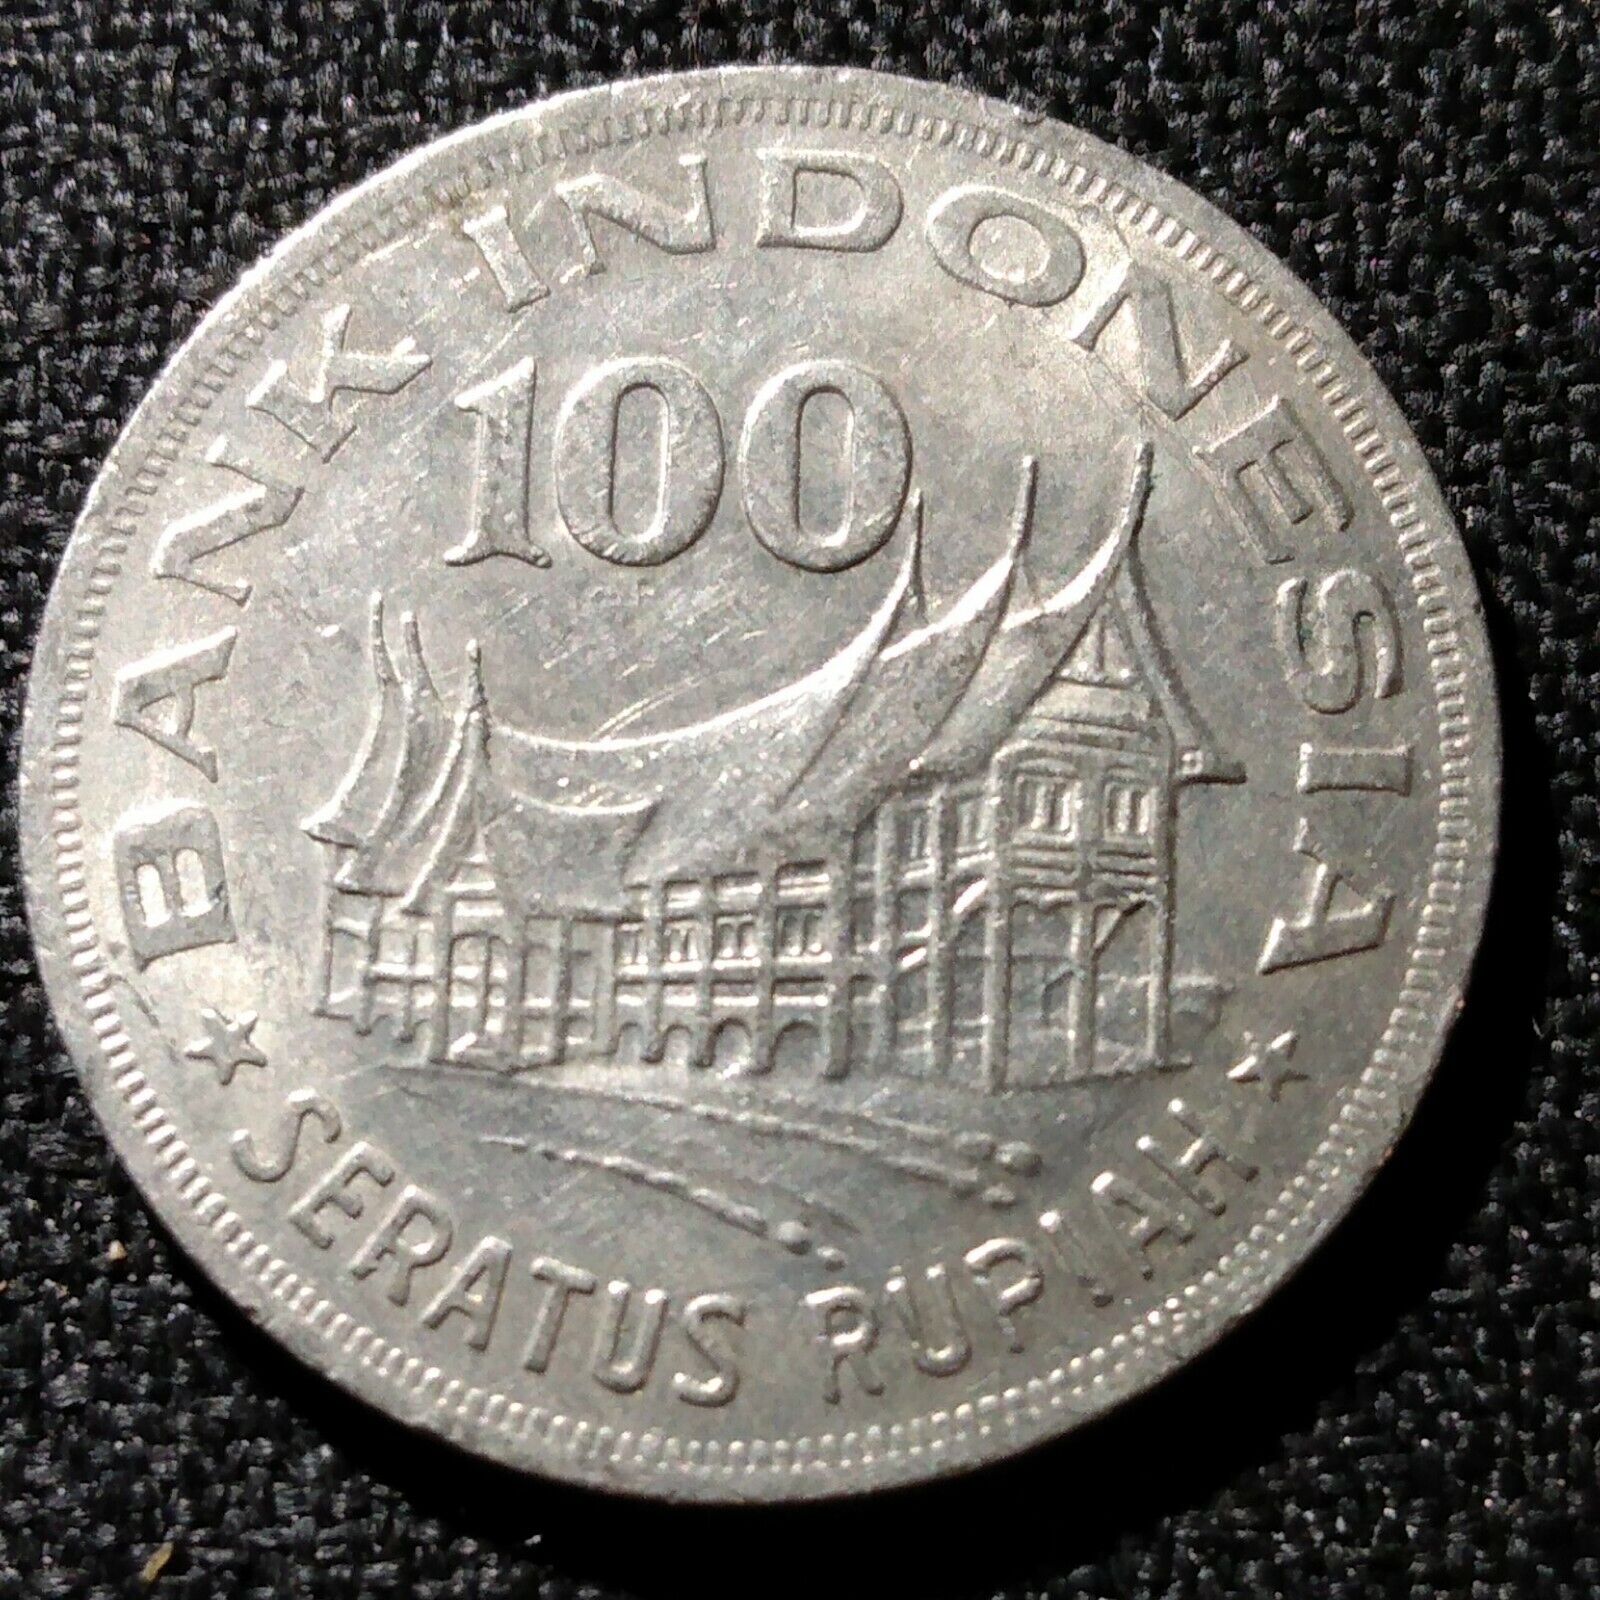 🇮🇩 Ce23 1978 Indonesia 100 Rupiah  Coin - Fast Ship + Combine & Save 🇮🇩